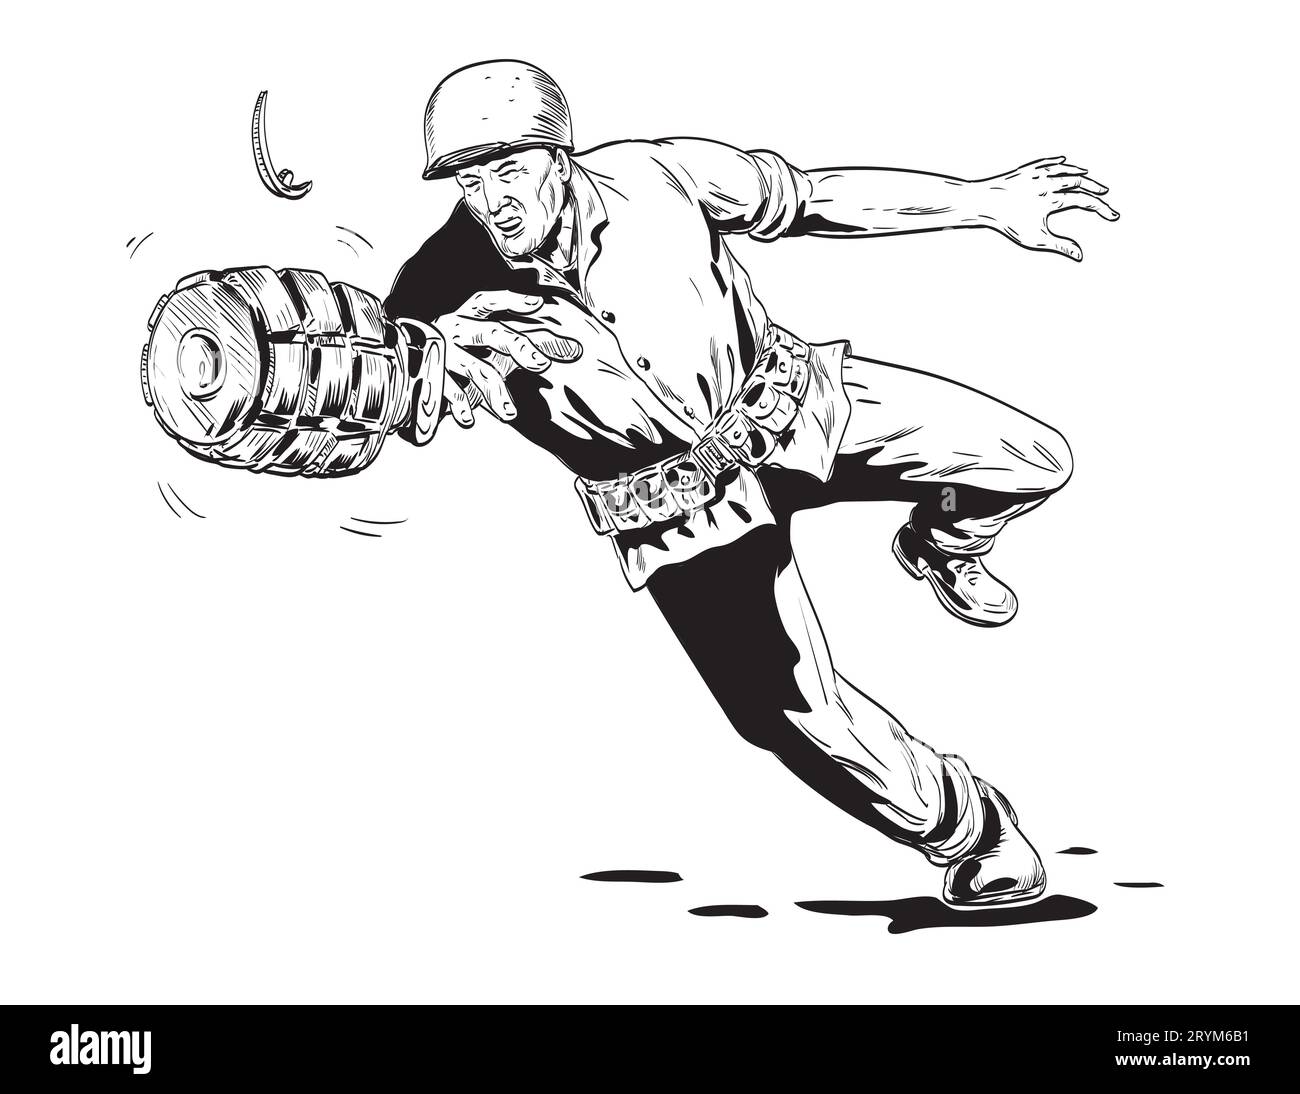 World War Two American Gi Soldier Throwing Hand Grenade Front View Comics Style Drawing Stock Photo